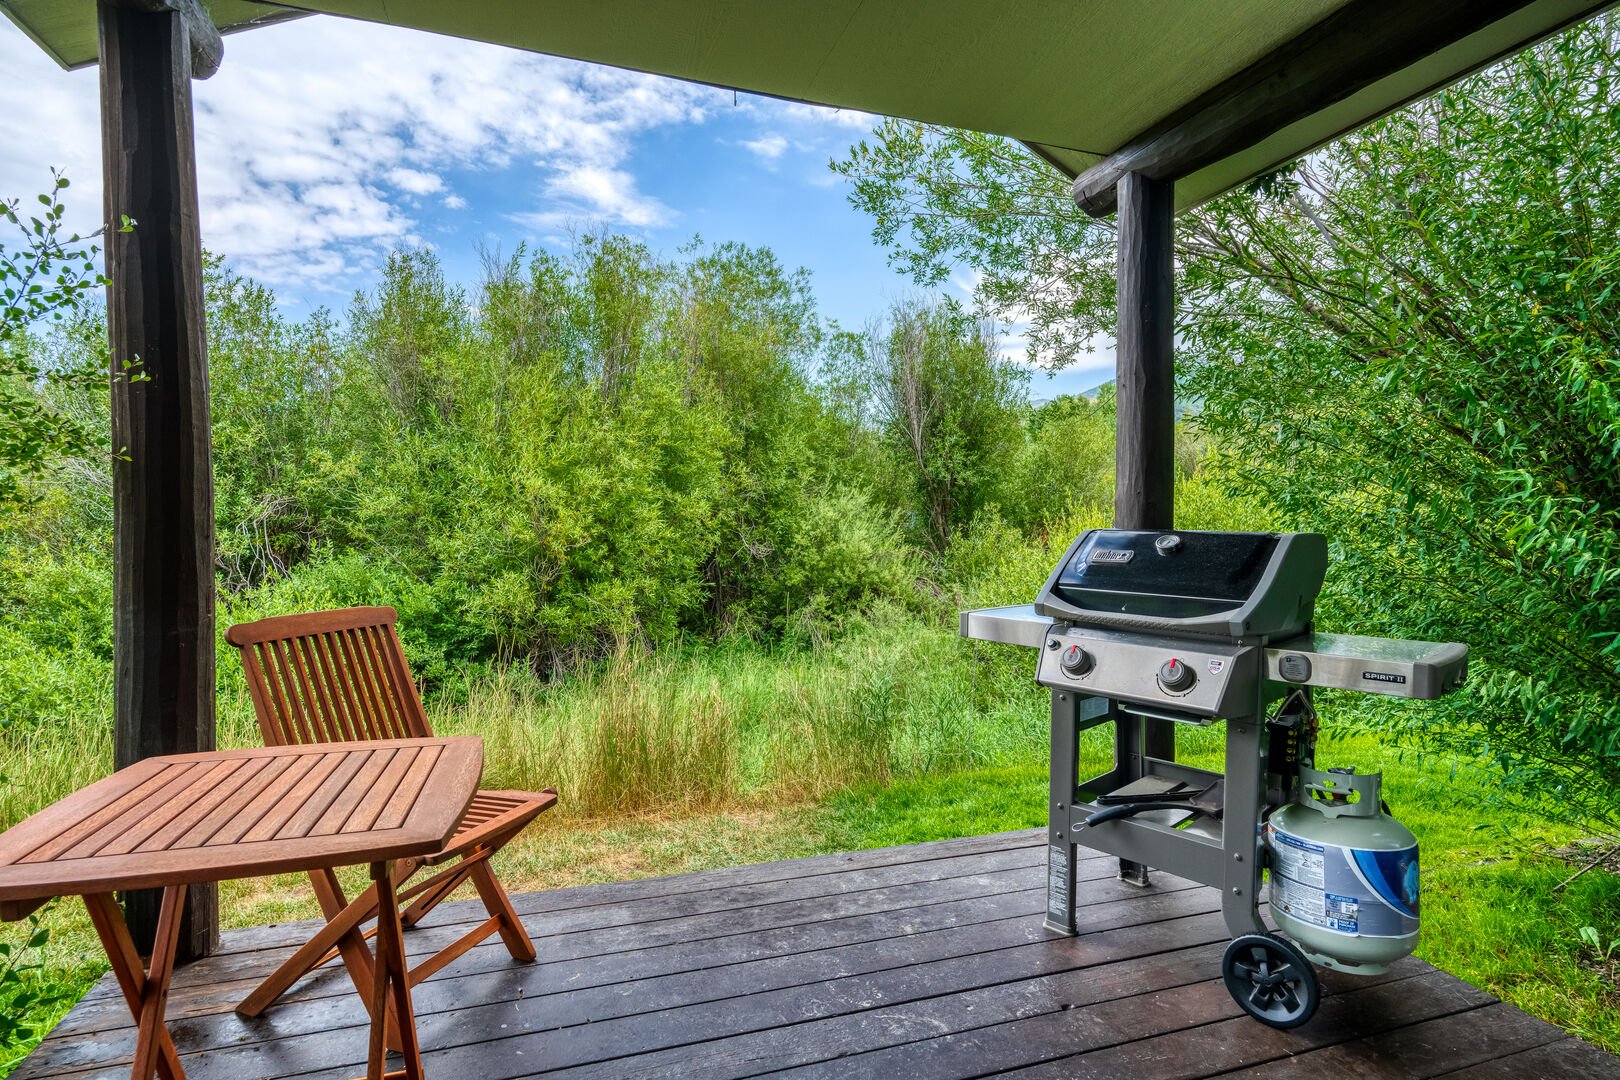 Looking Out from the Covered Back Deck with a Grill